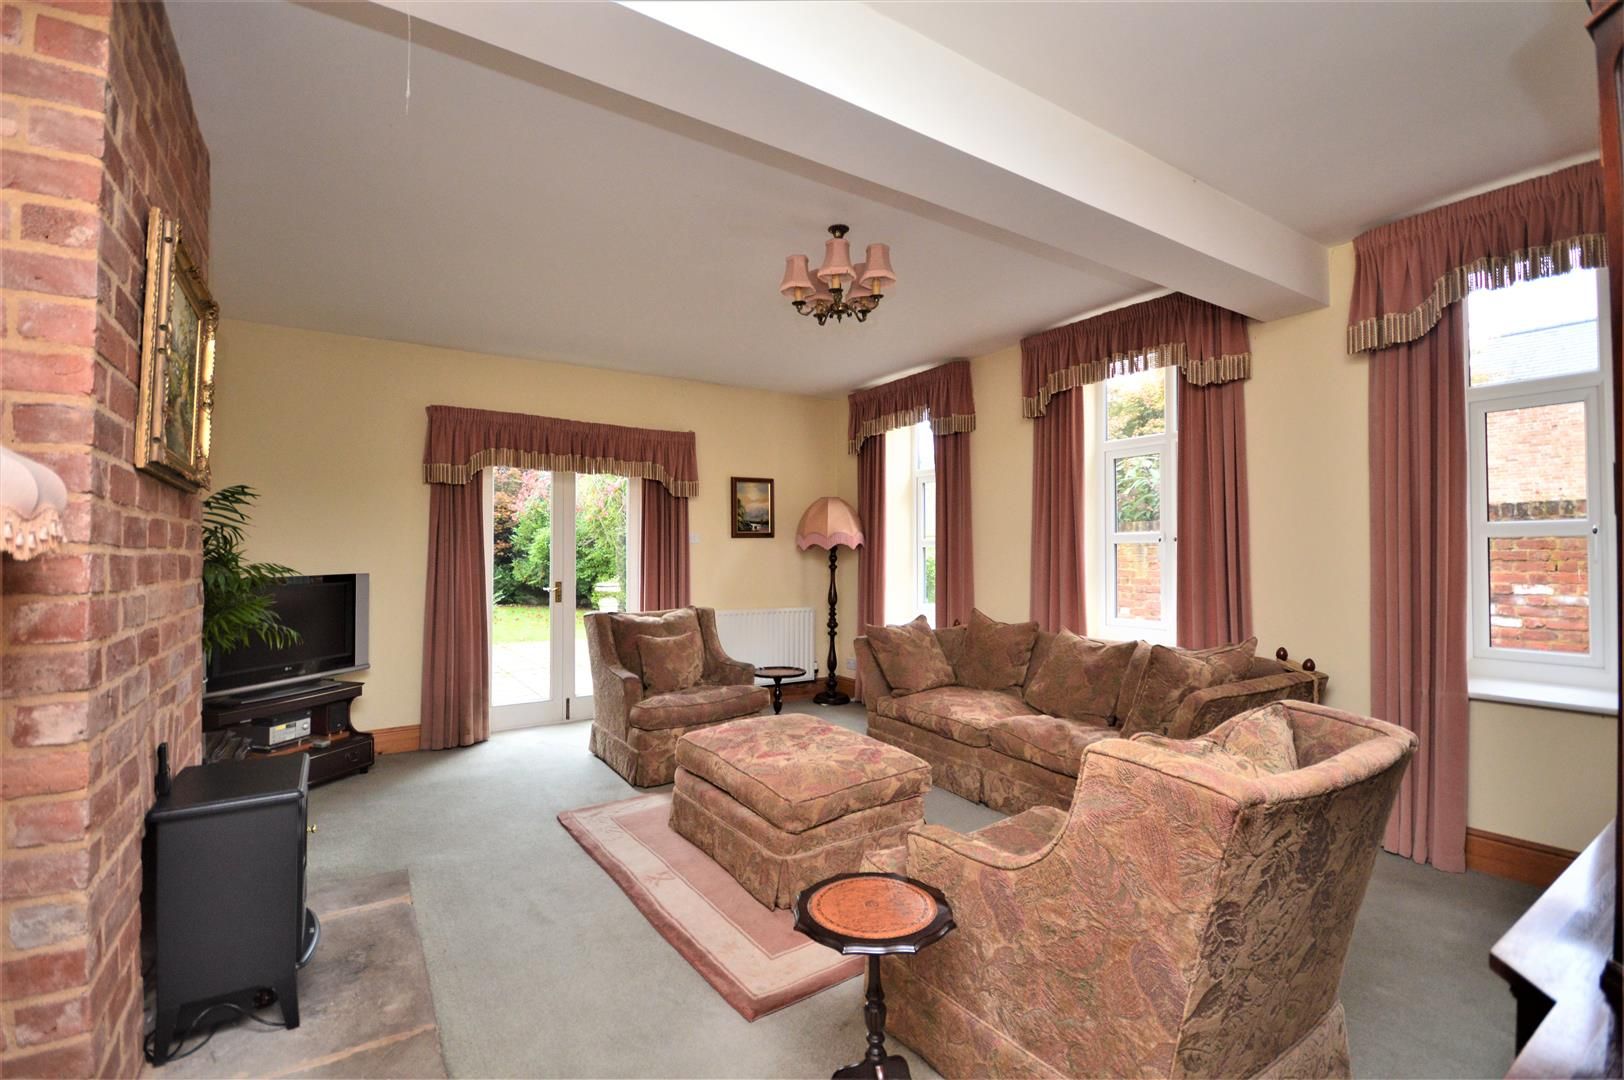 4 bed semi-detached for sale in Nr Madley 7